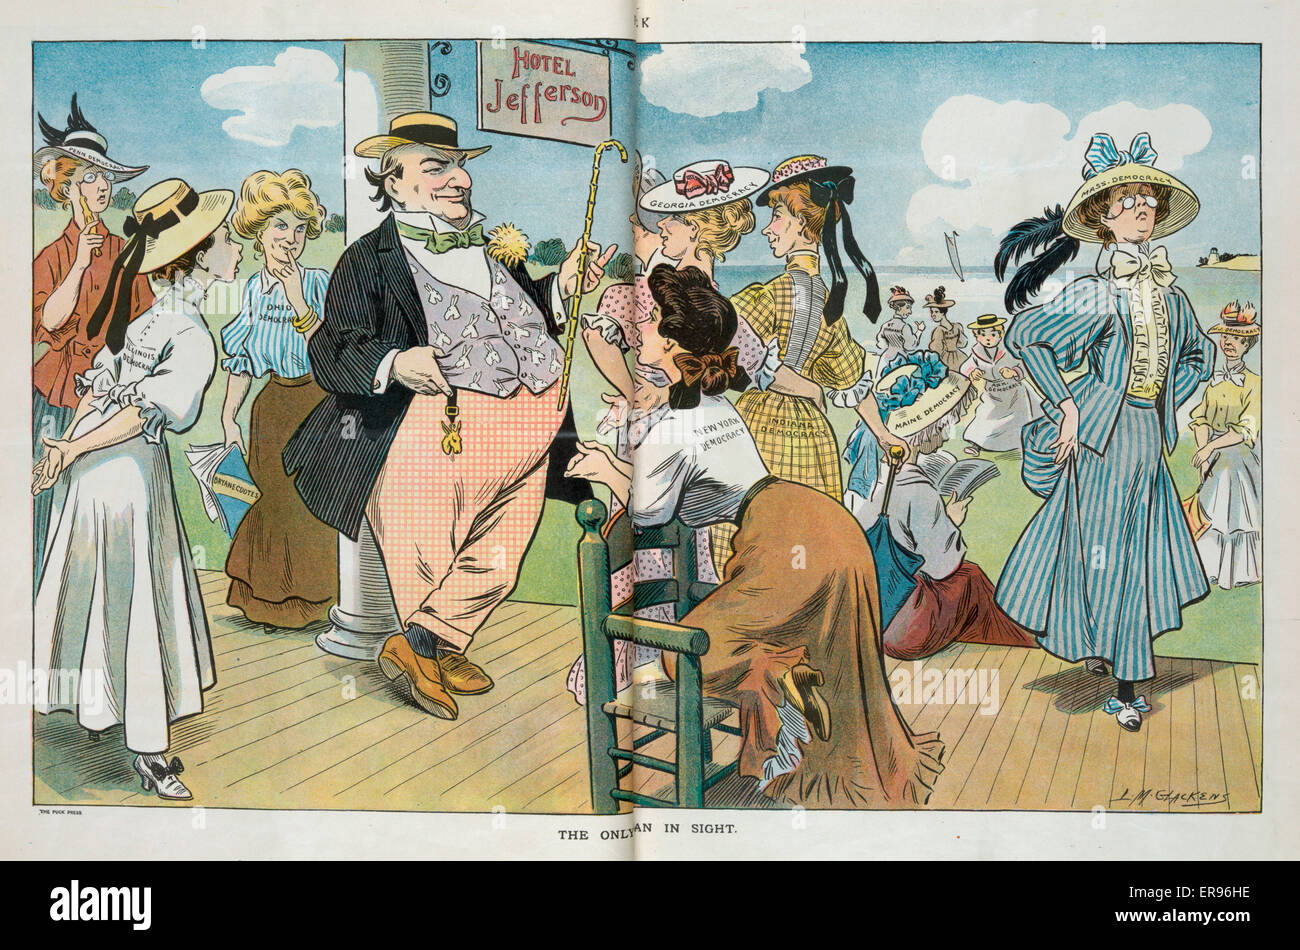 The only man in sight. Illustration shows William Jennings Bryan standing on the veranda of the Hotel Jefferson attracting the attention of several women labeled Penn Democracy, Illinois Democracy, Ohio Democrary, New York Democracy, Indiana Democrary, Ge Stock Photo